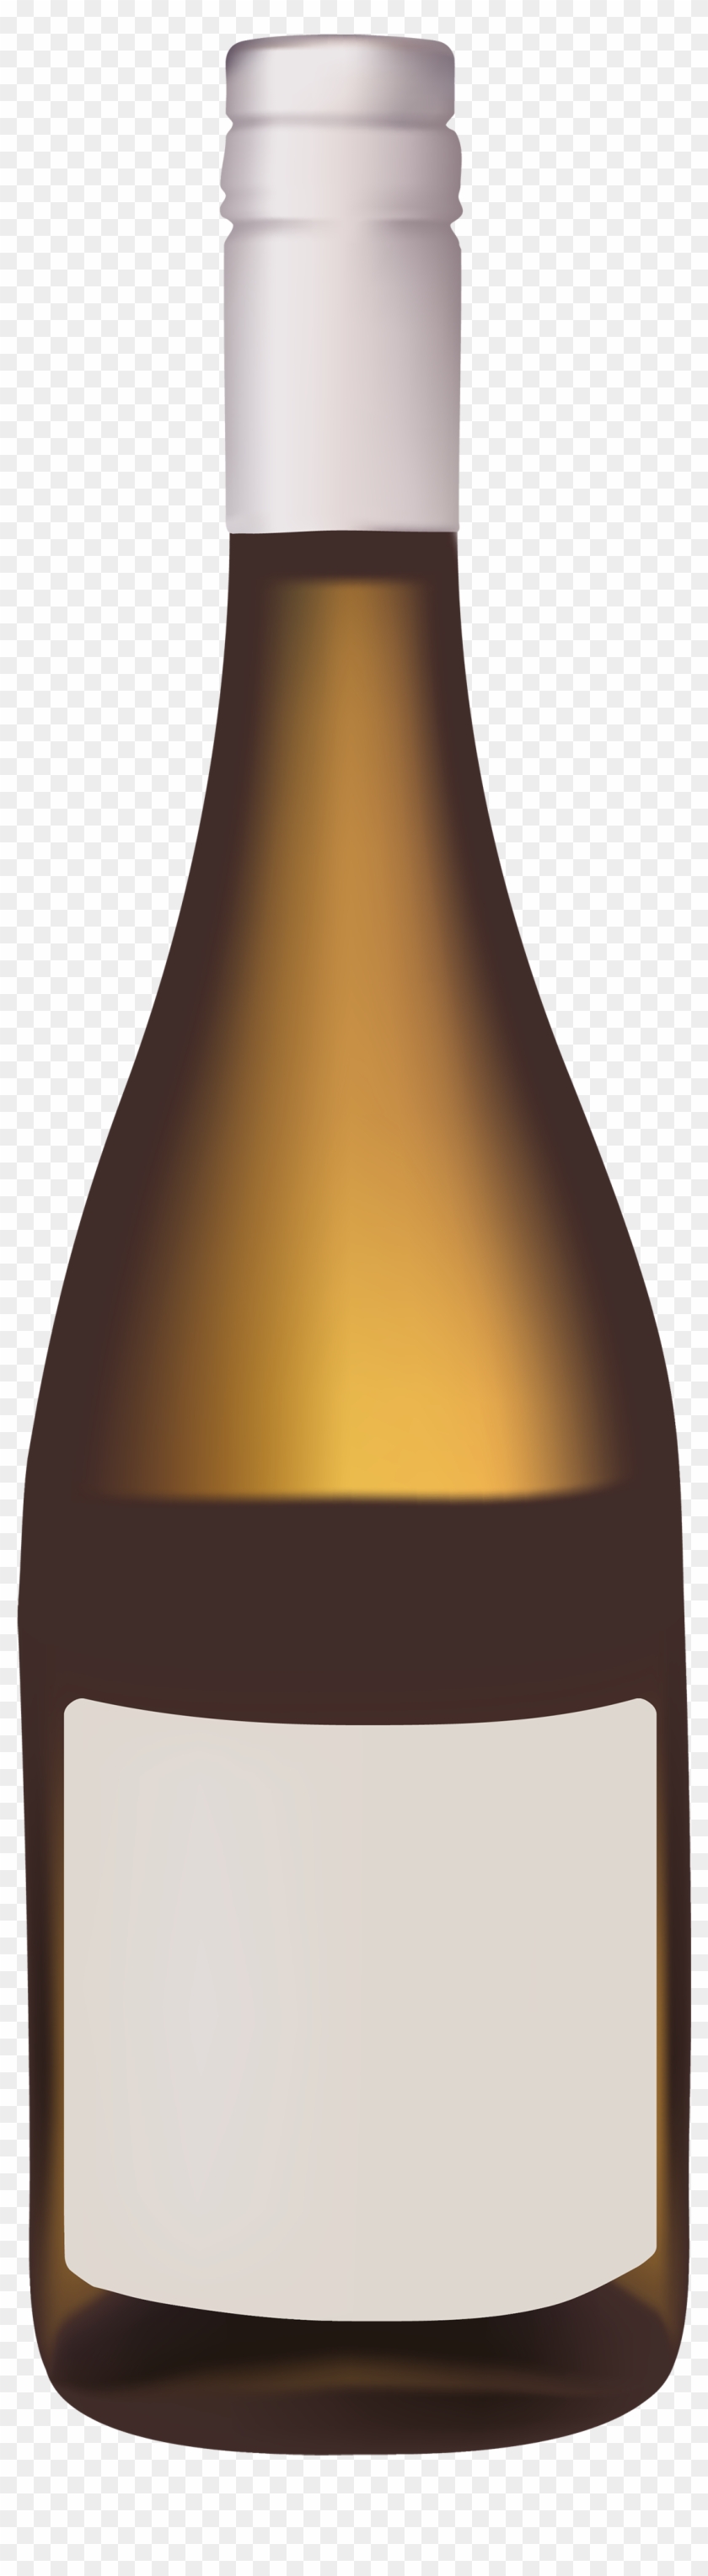 Wine Clipart Gold - Wine Bottle Clipart Png #532650